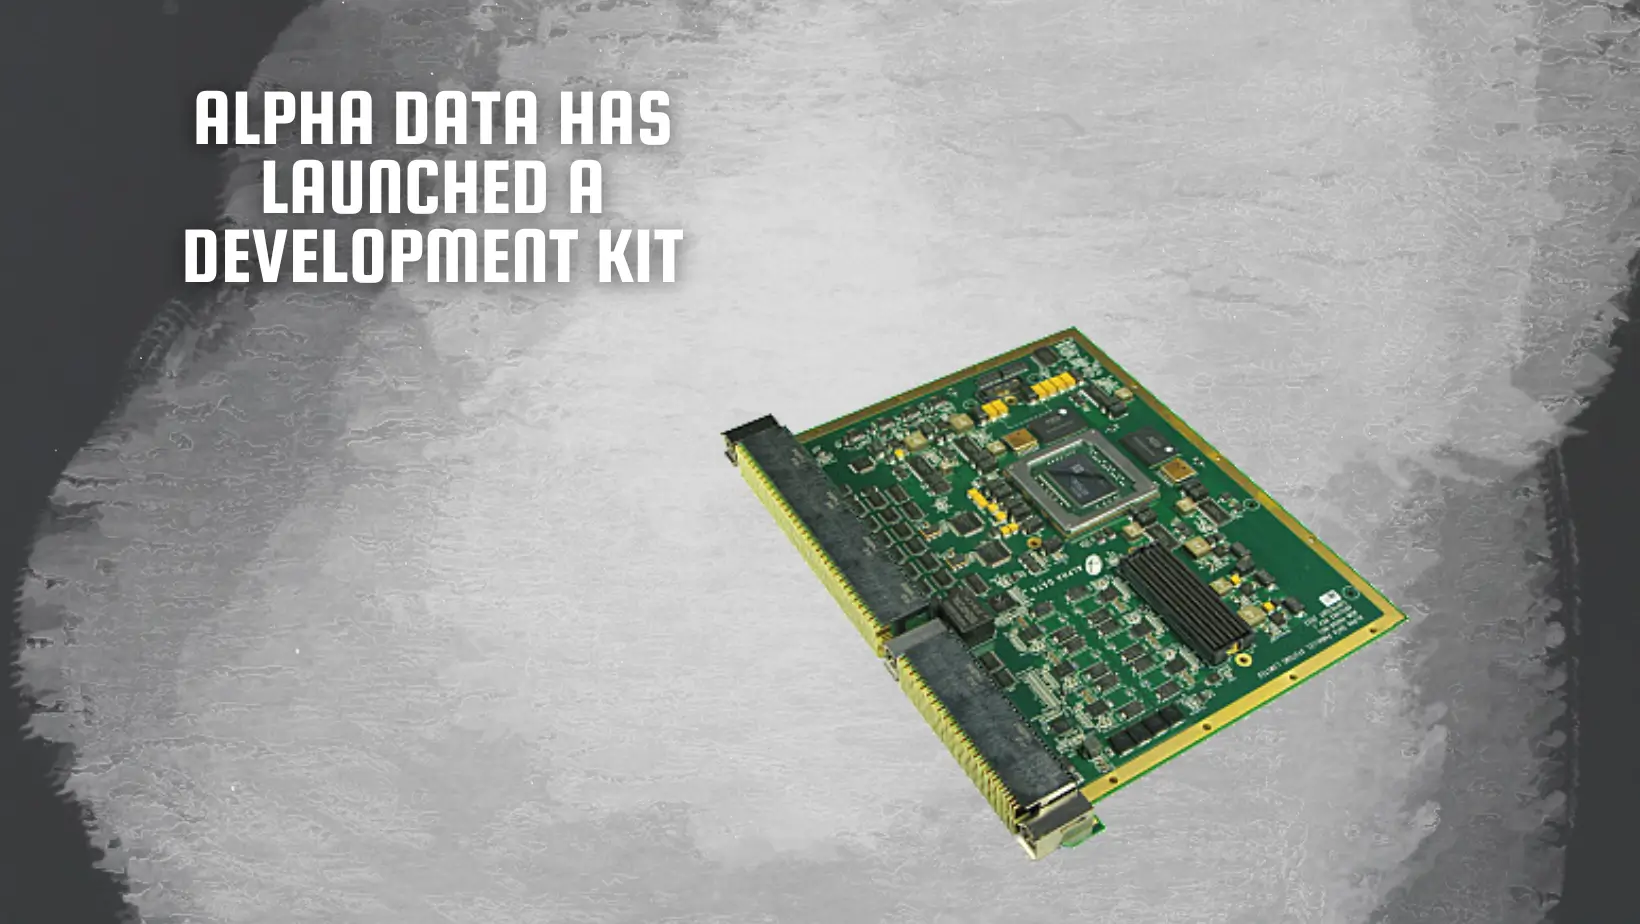 Alpha Data has launched a Development Kit